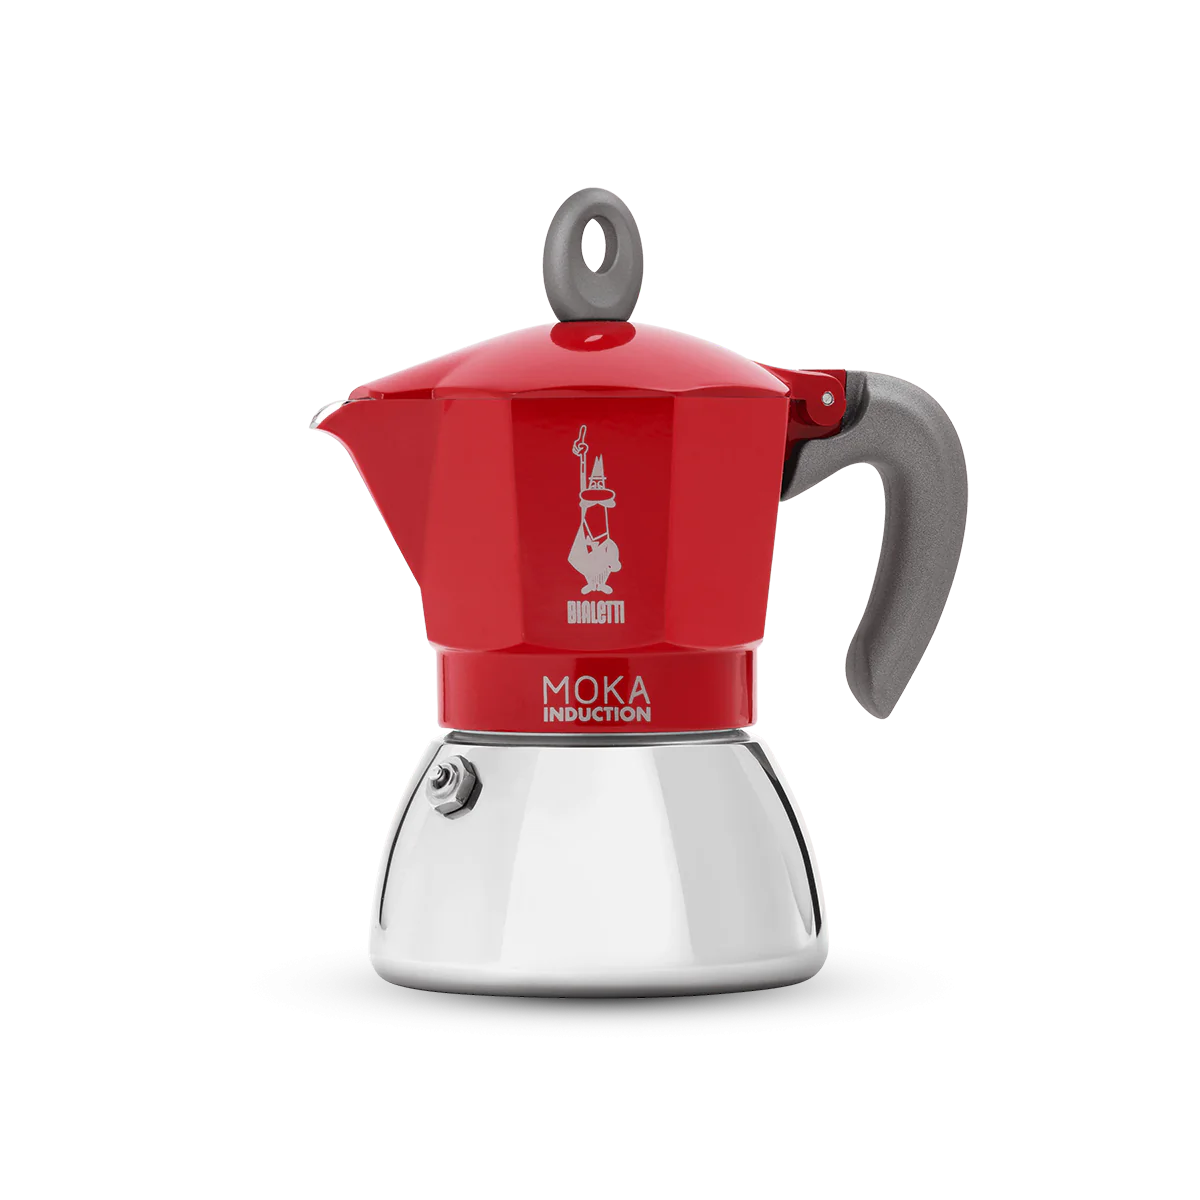 Bialetti Moka Induction 6 Cup Red